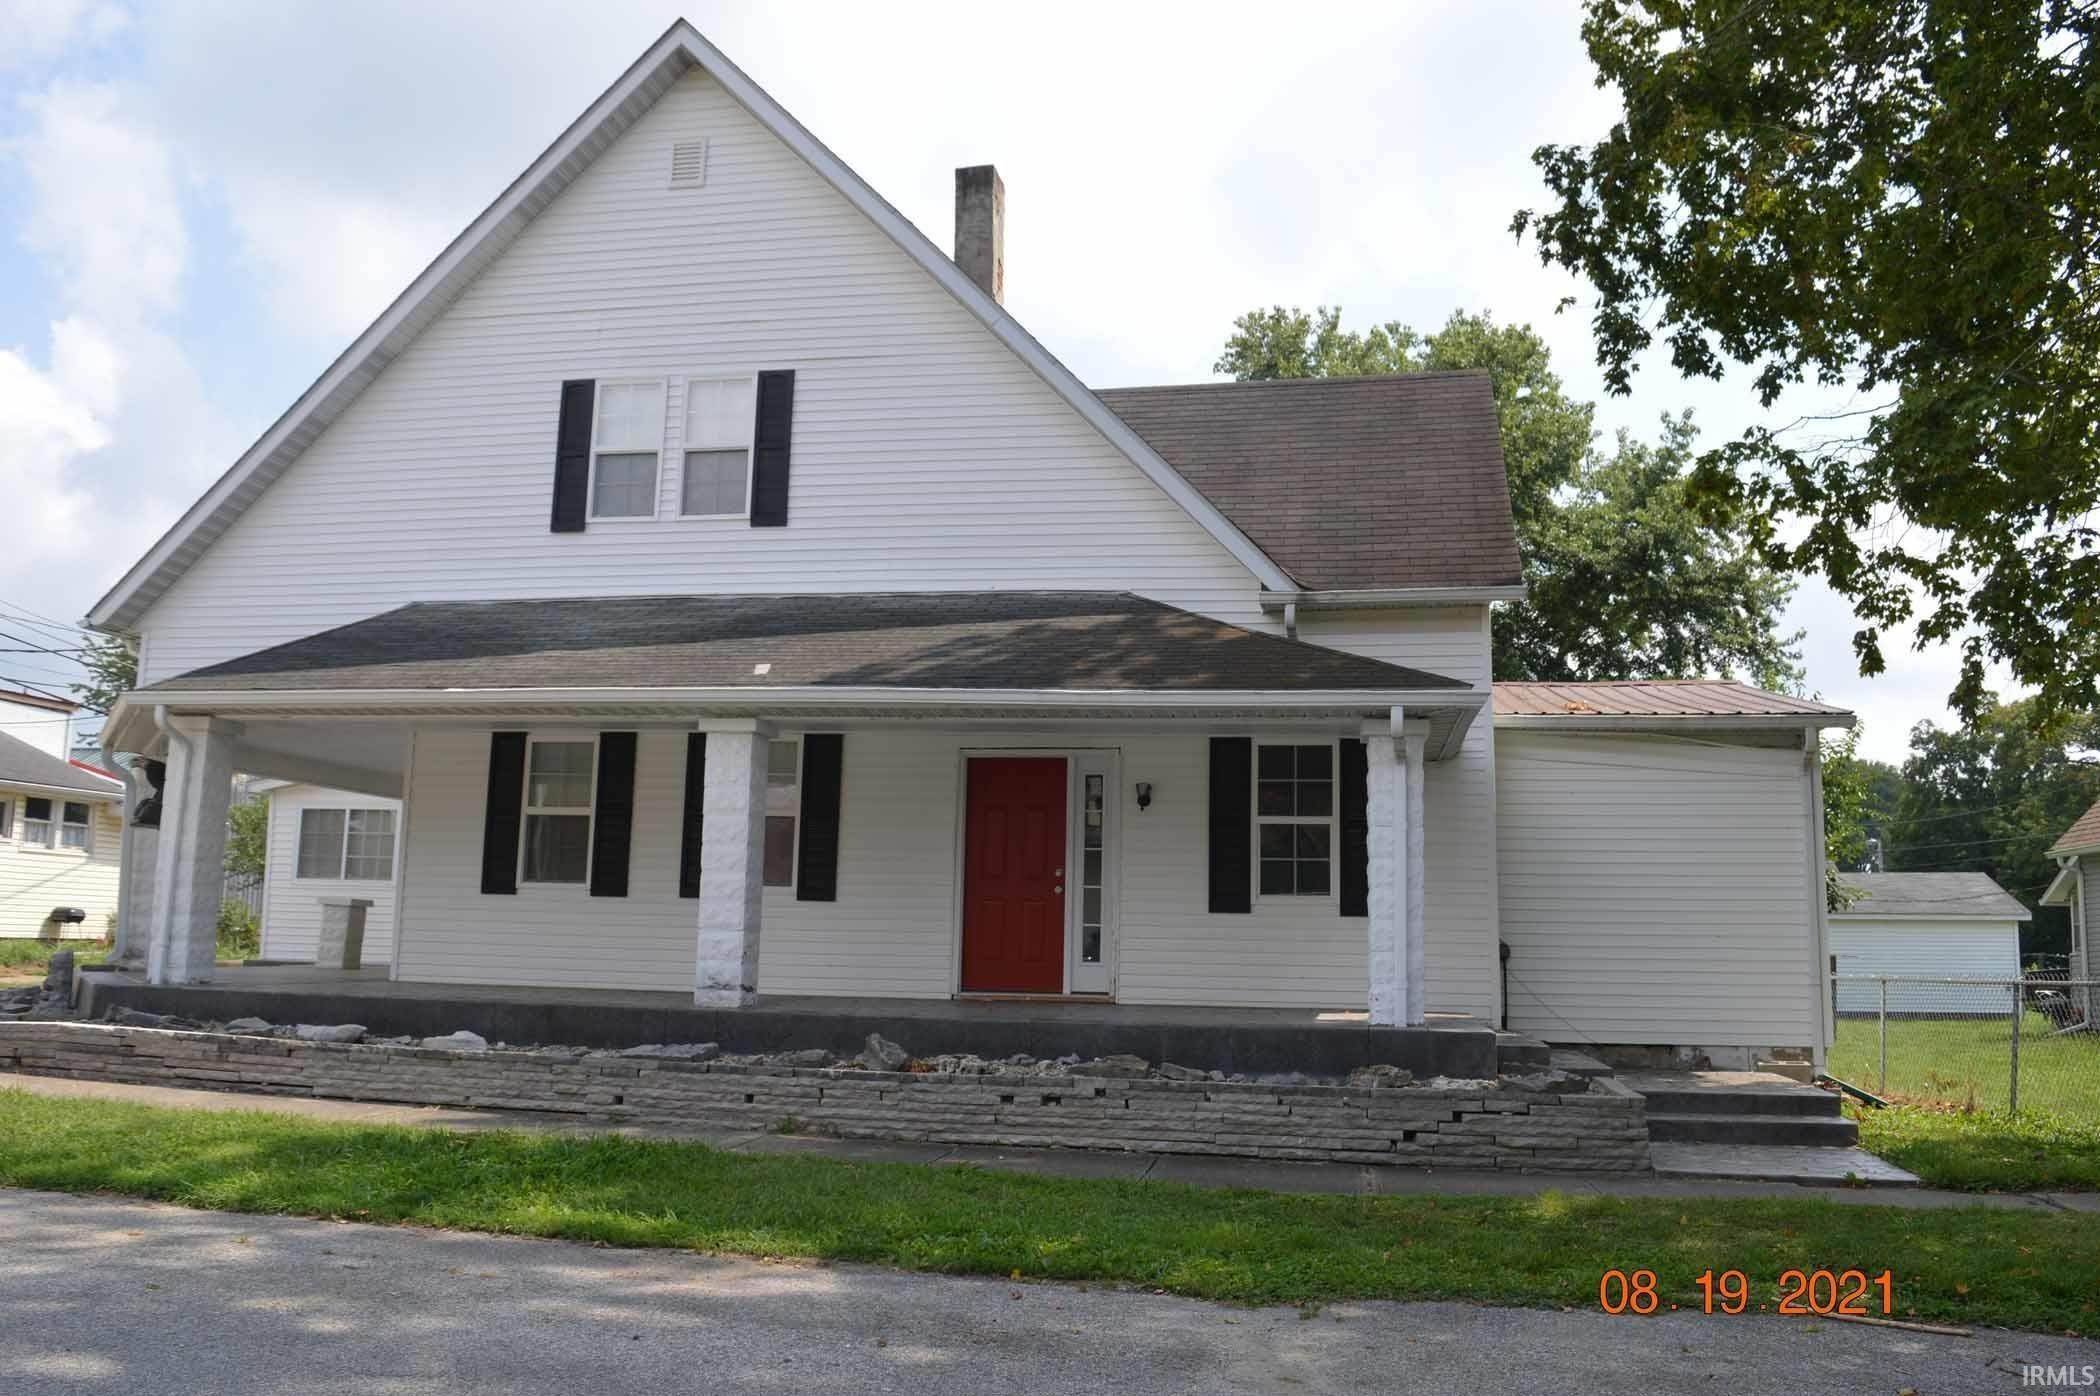 Duplex Homes for Sale at 11 S 4th Street Gosport, Indiana 47433 United States